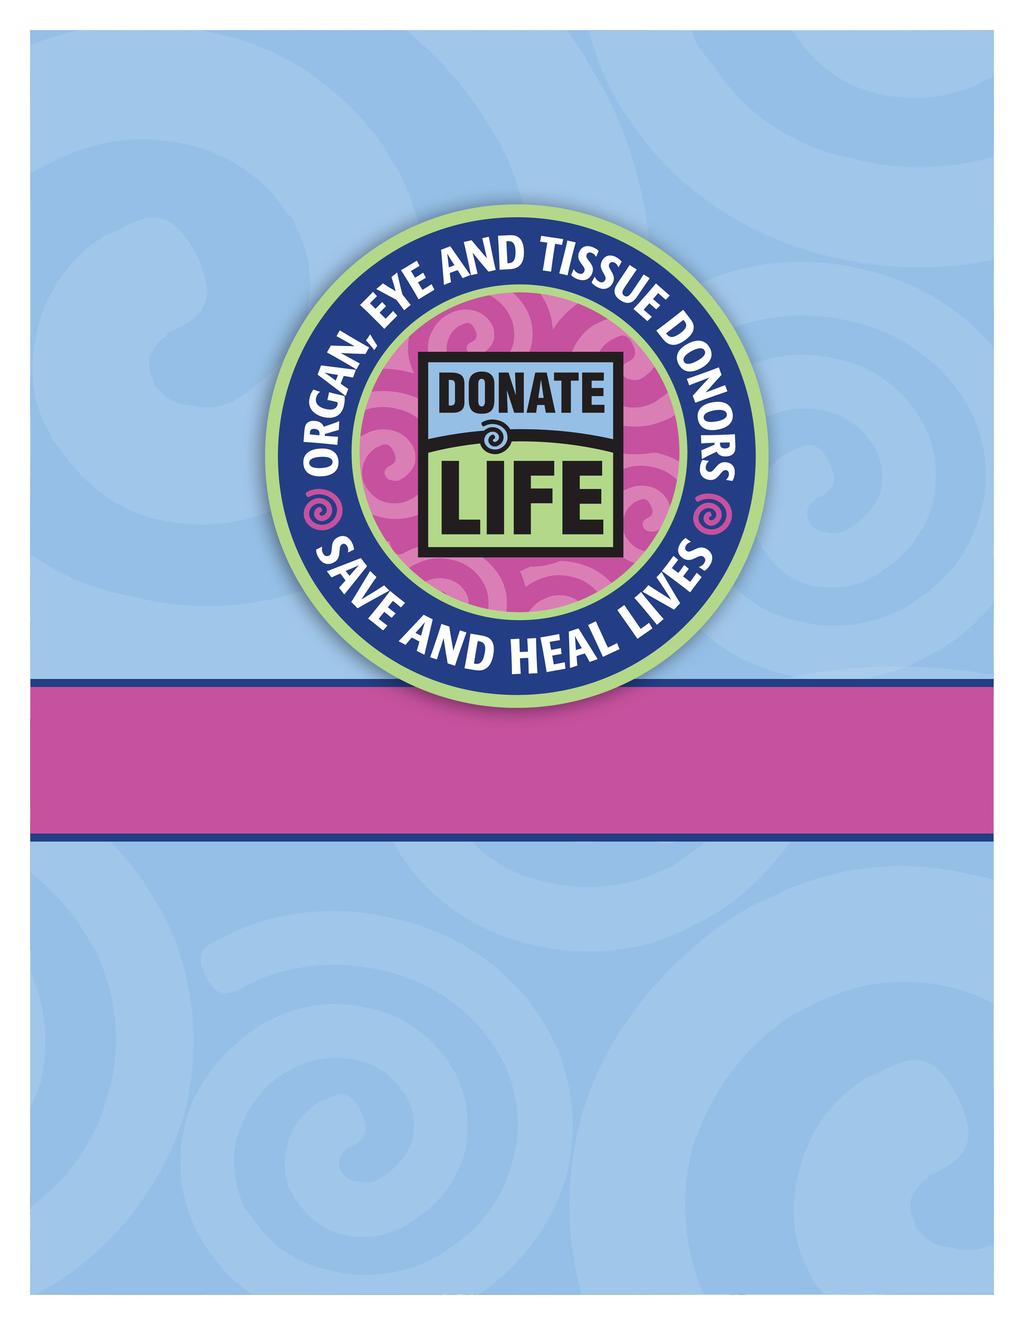 Donate Life Patch Program Quick Start Guide The Donate Life Patch Program Quick Start Guide was developed by the Donate Life Youth Education Committee.